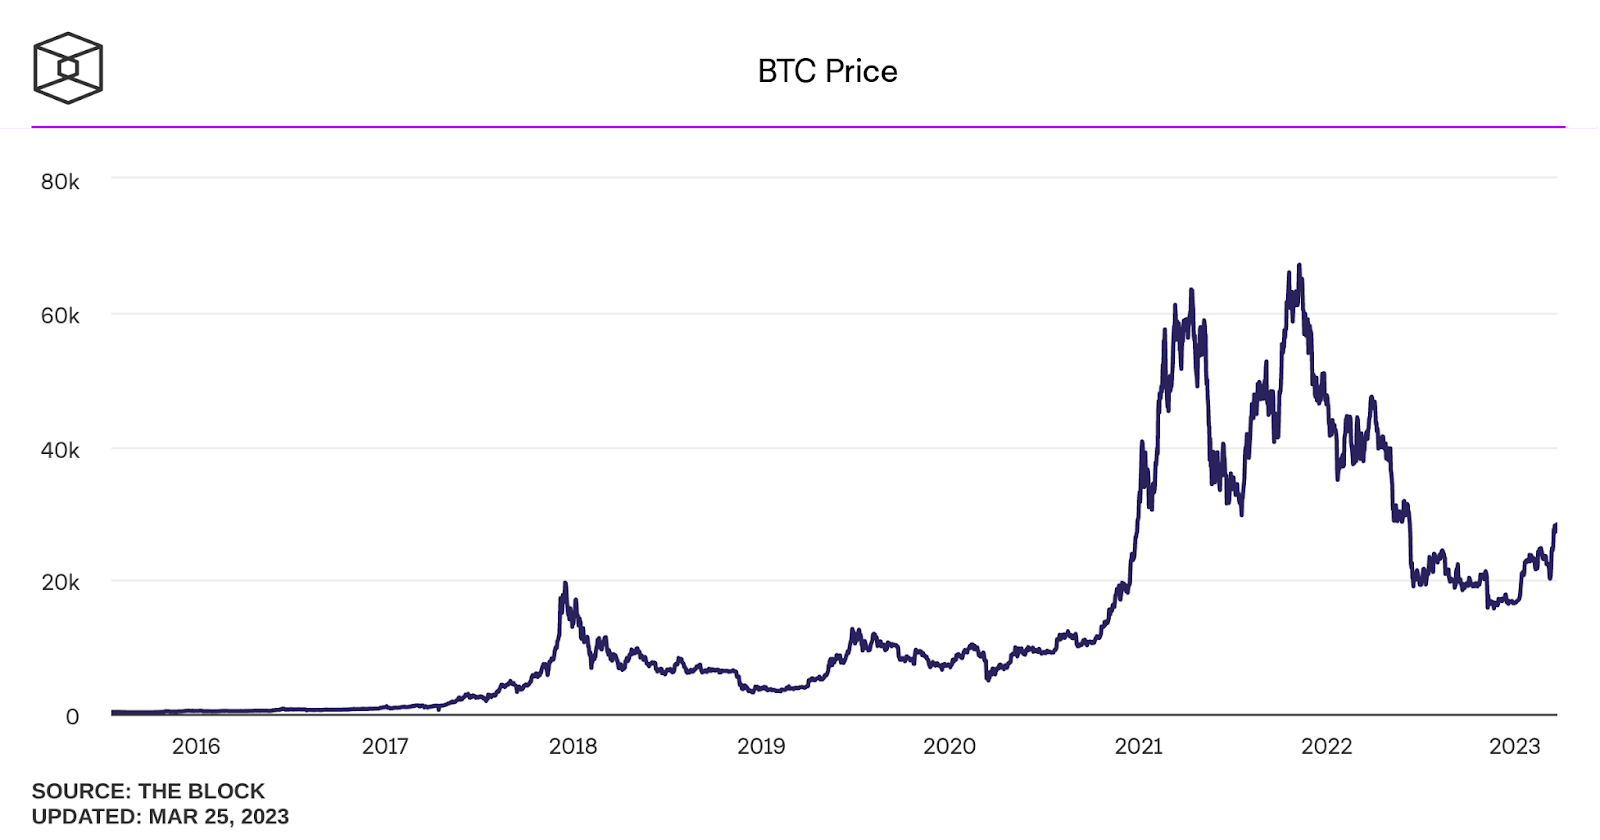 Figure 3: The value placed on Bitcoin has increased tremendously in the past 5 years as indicated by the price in USD. 